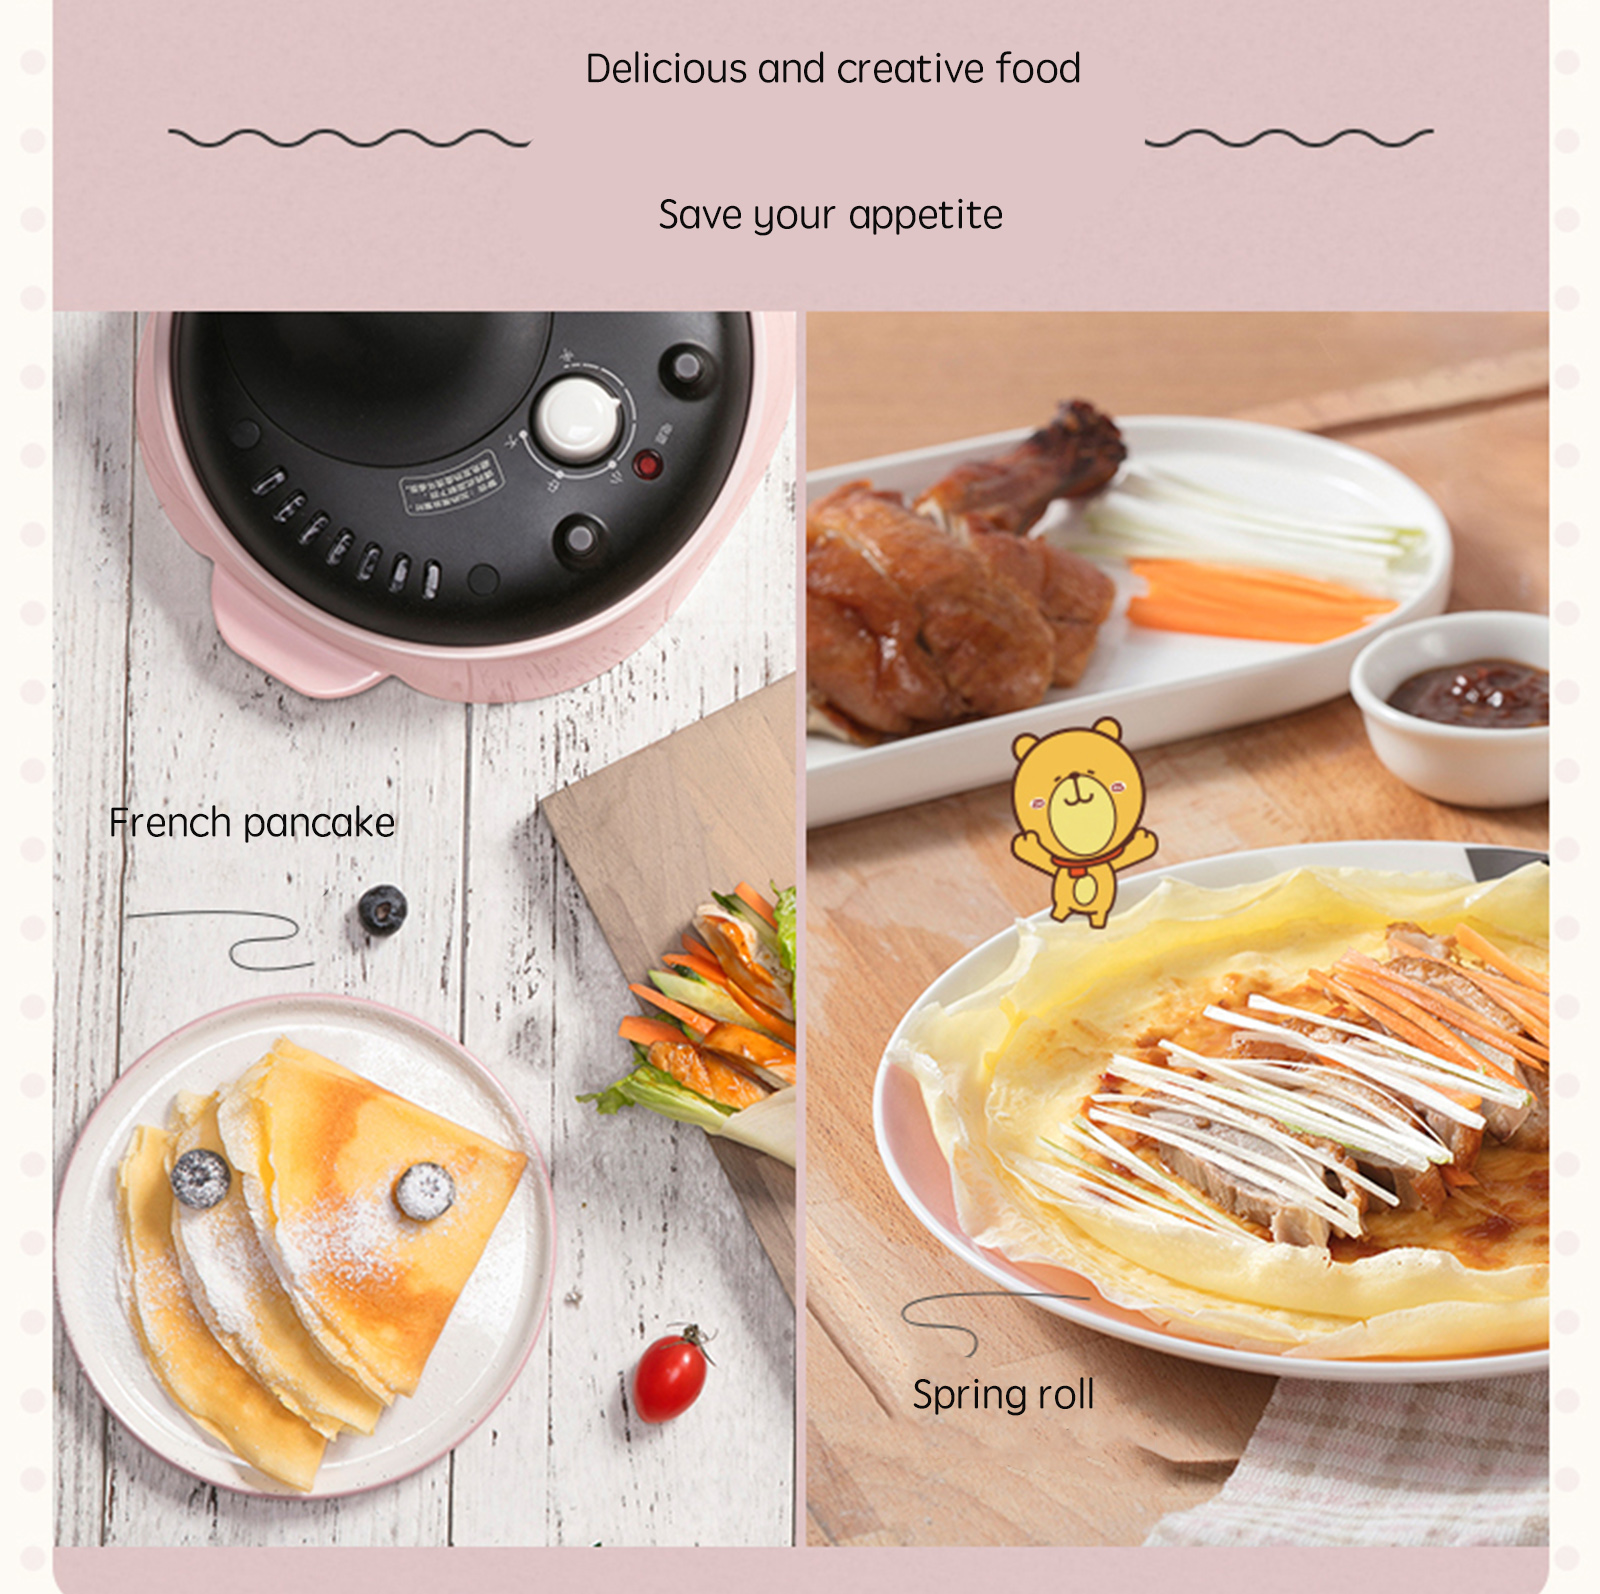 Instant Crepe Maker, Portable Electric Crepe Maker, 7in Crepe Maker with  Long Handle, Red Non-stick Electric Crepe Pan, Including Egg Beater &  Batter